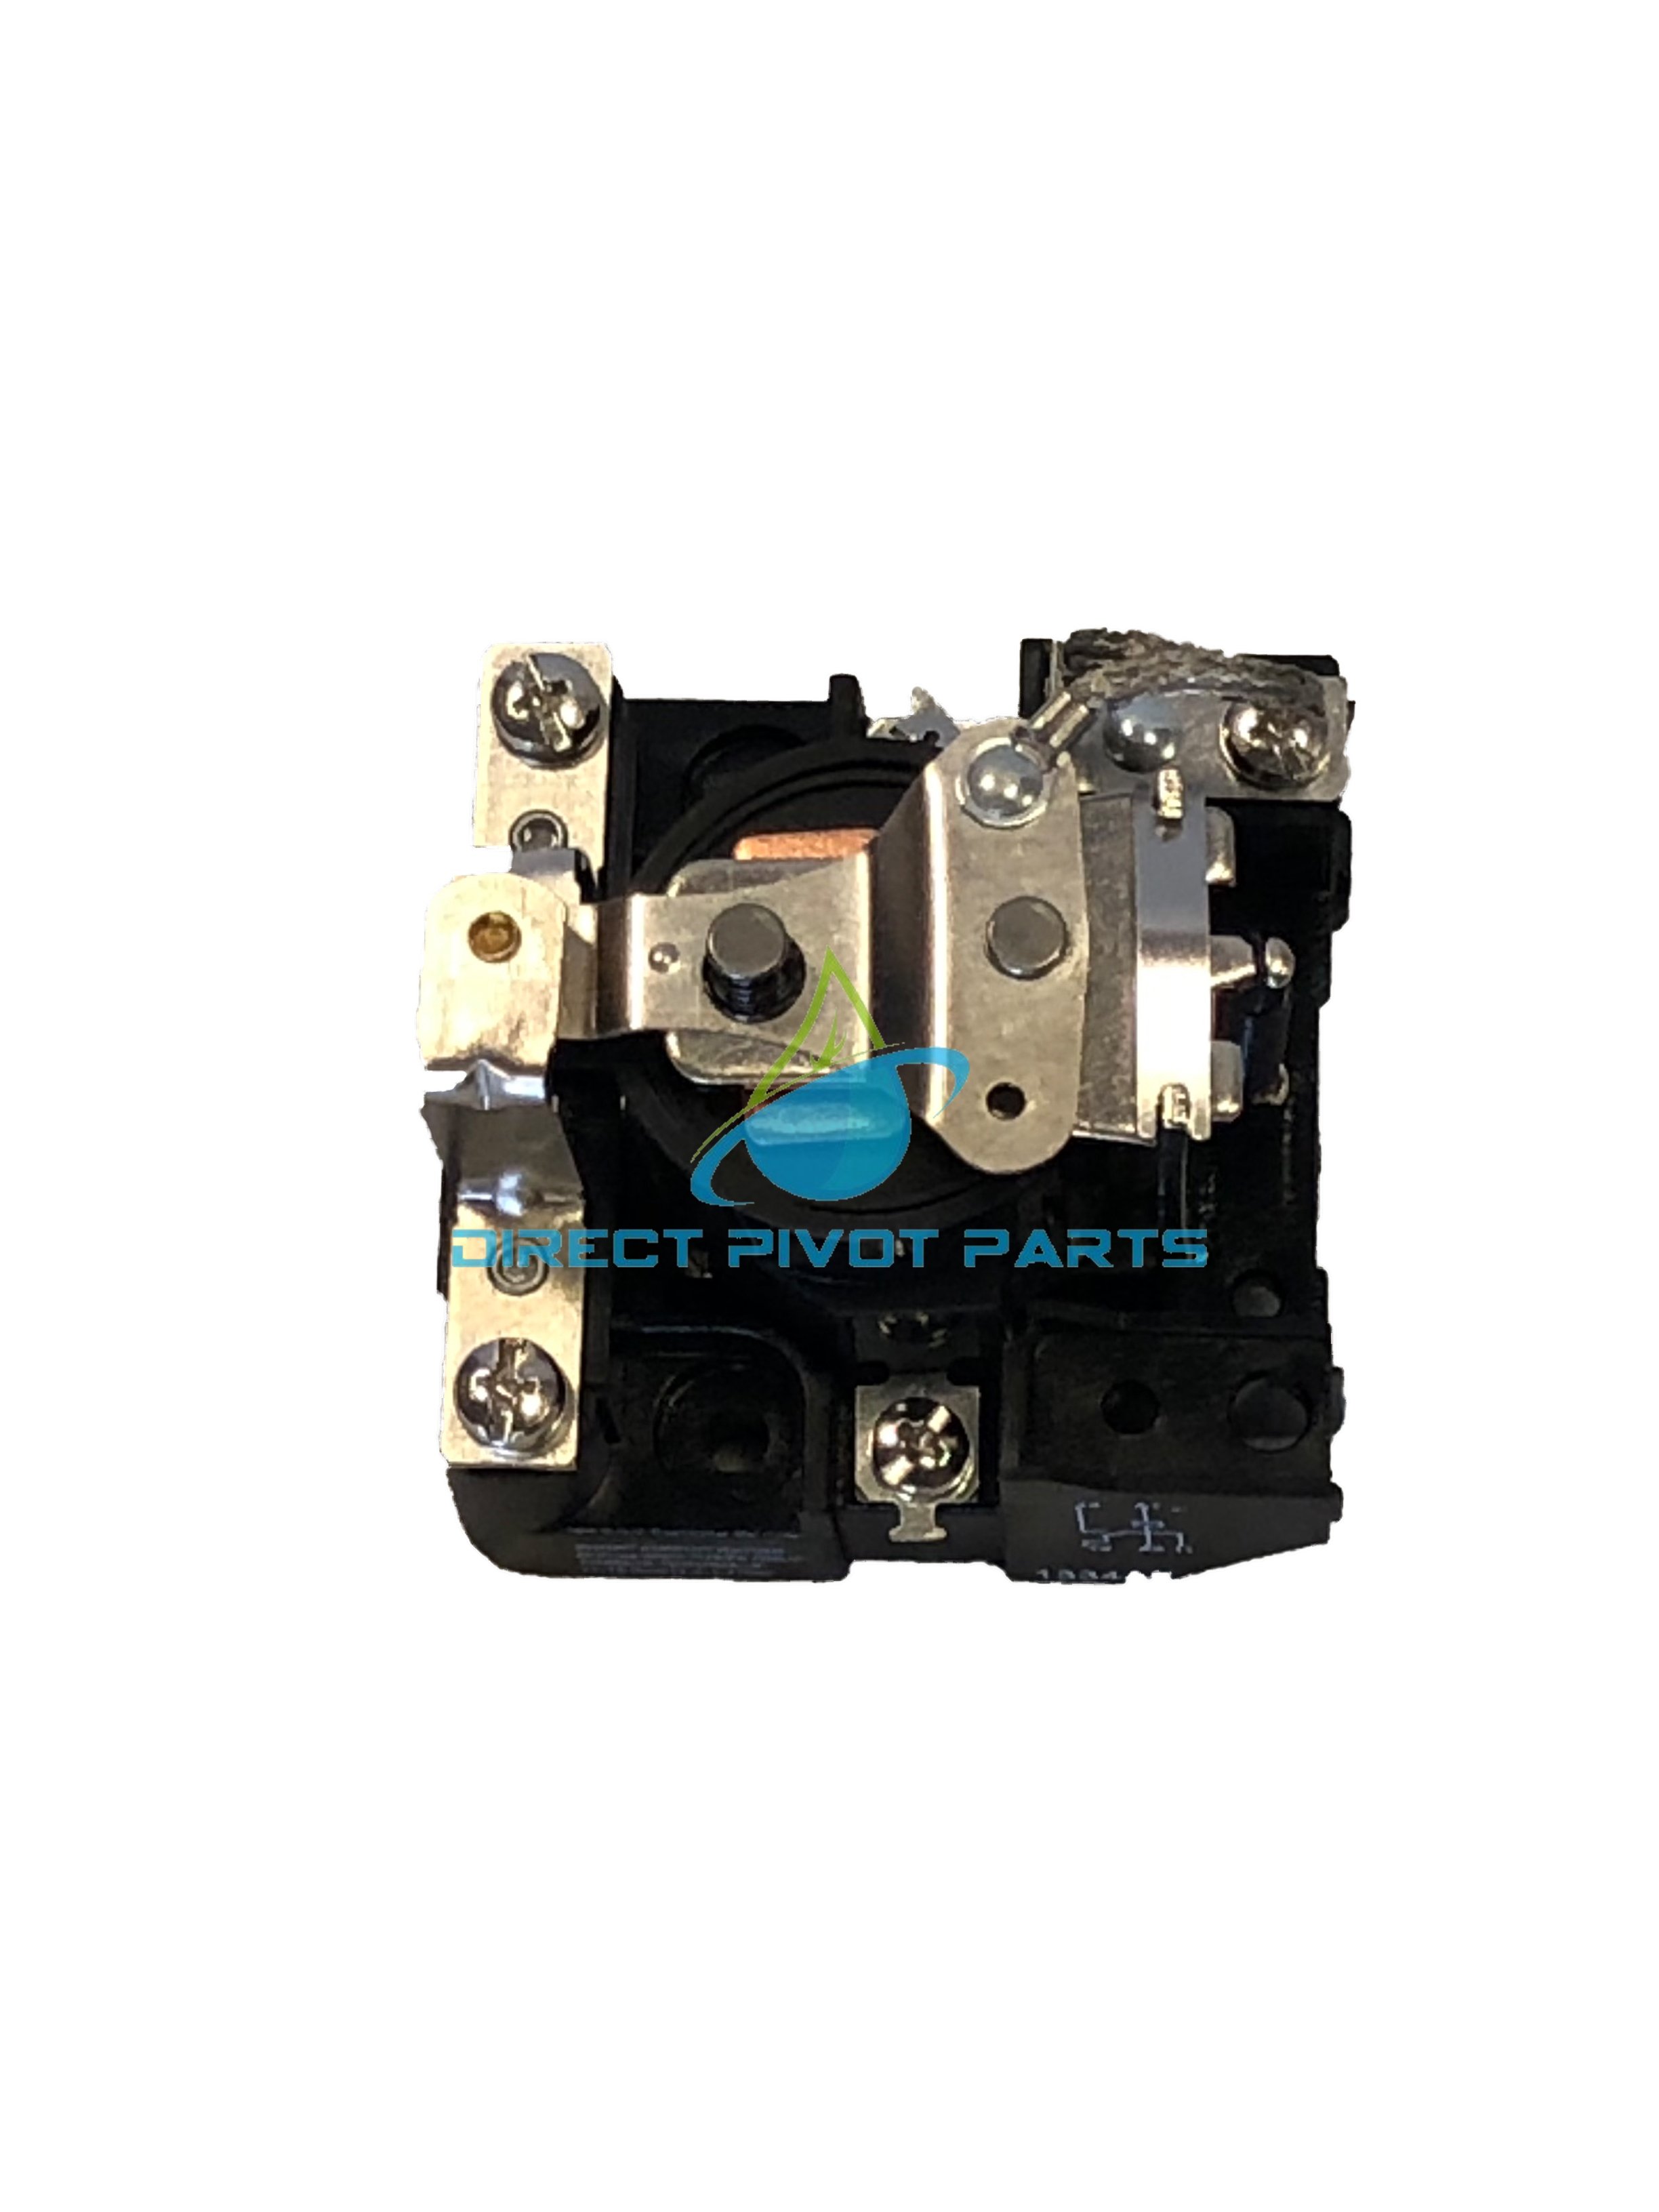  Power Relay Parts